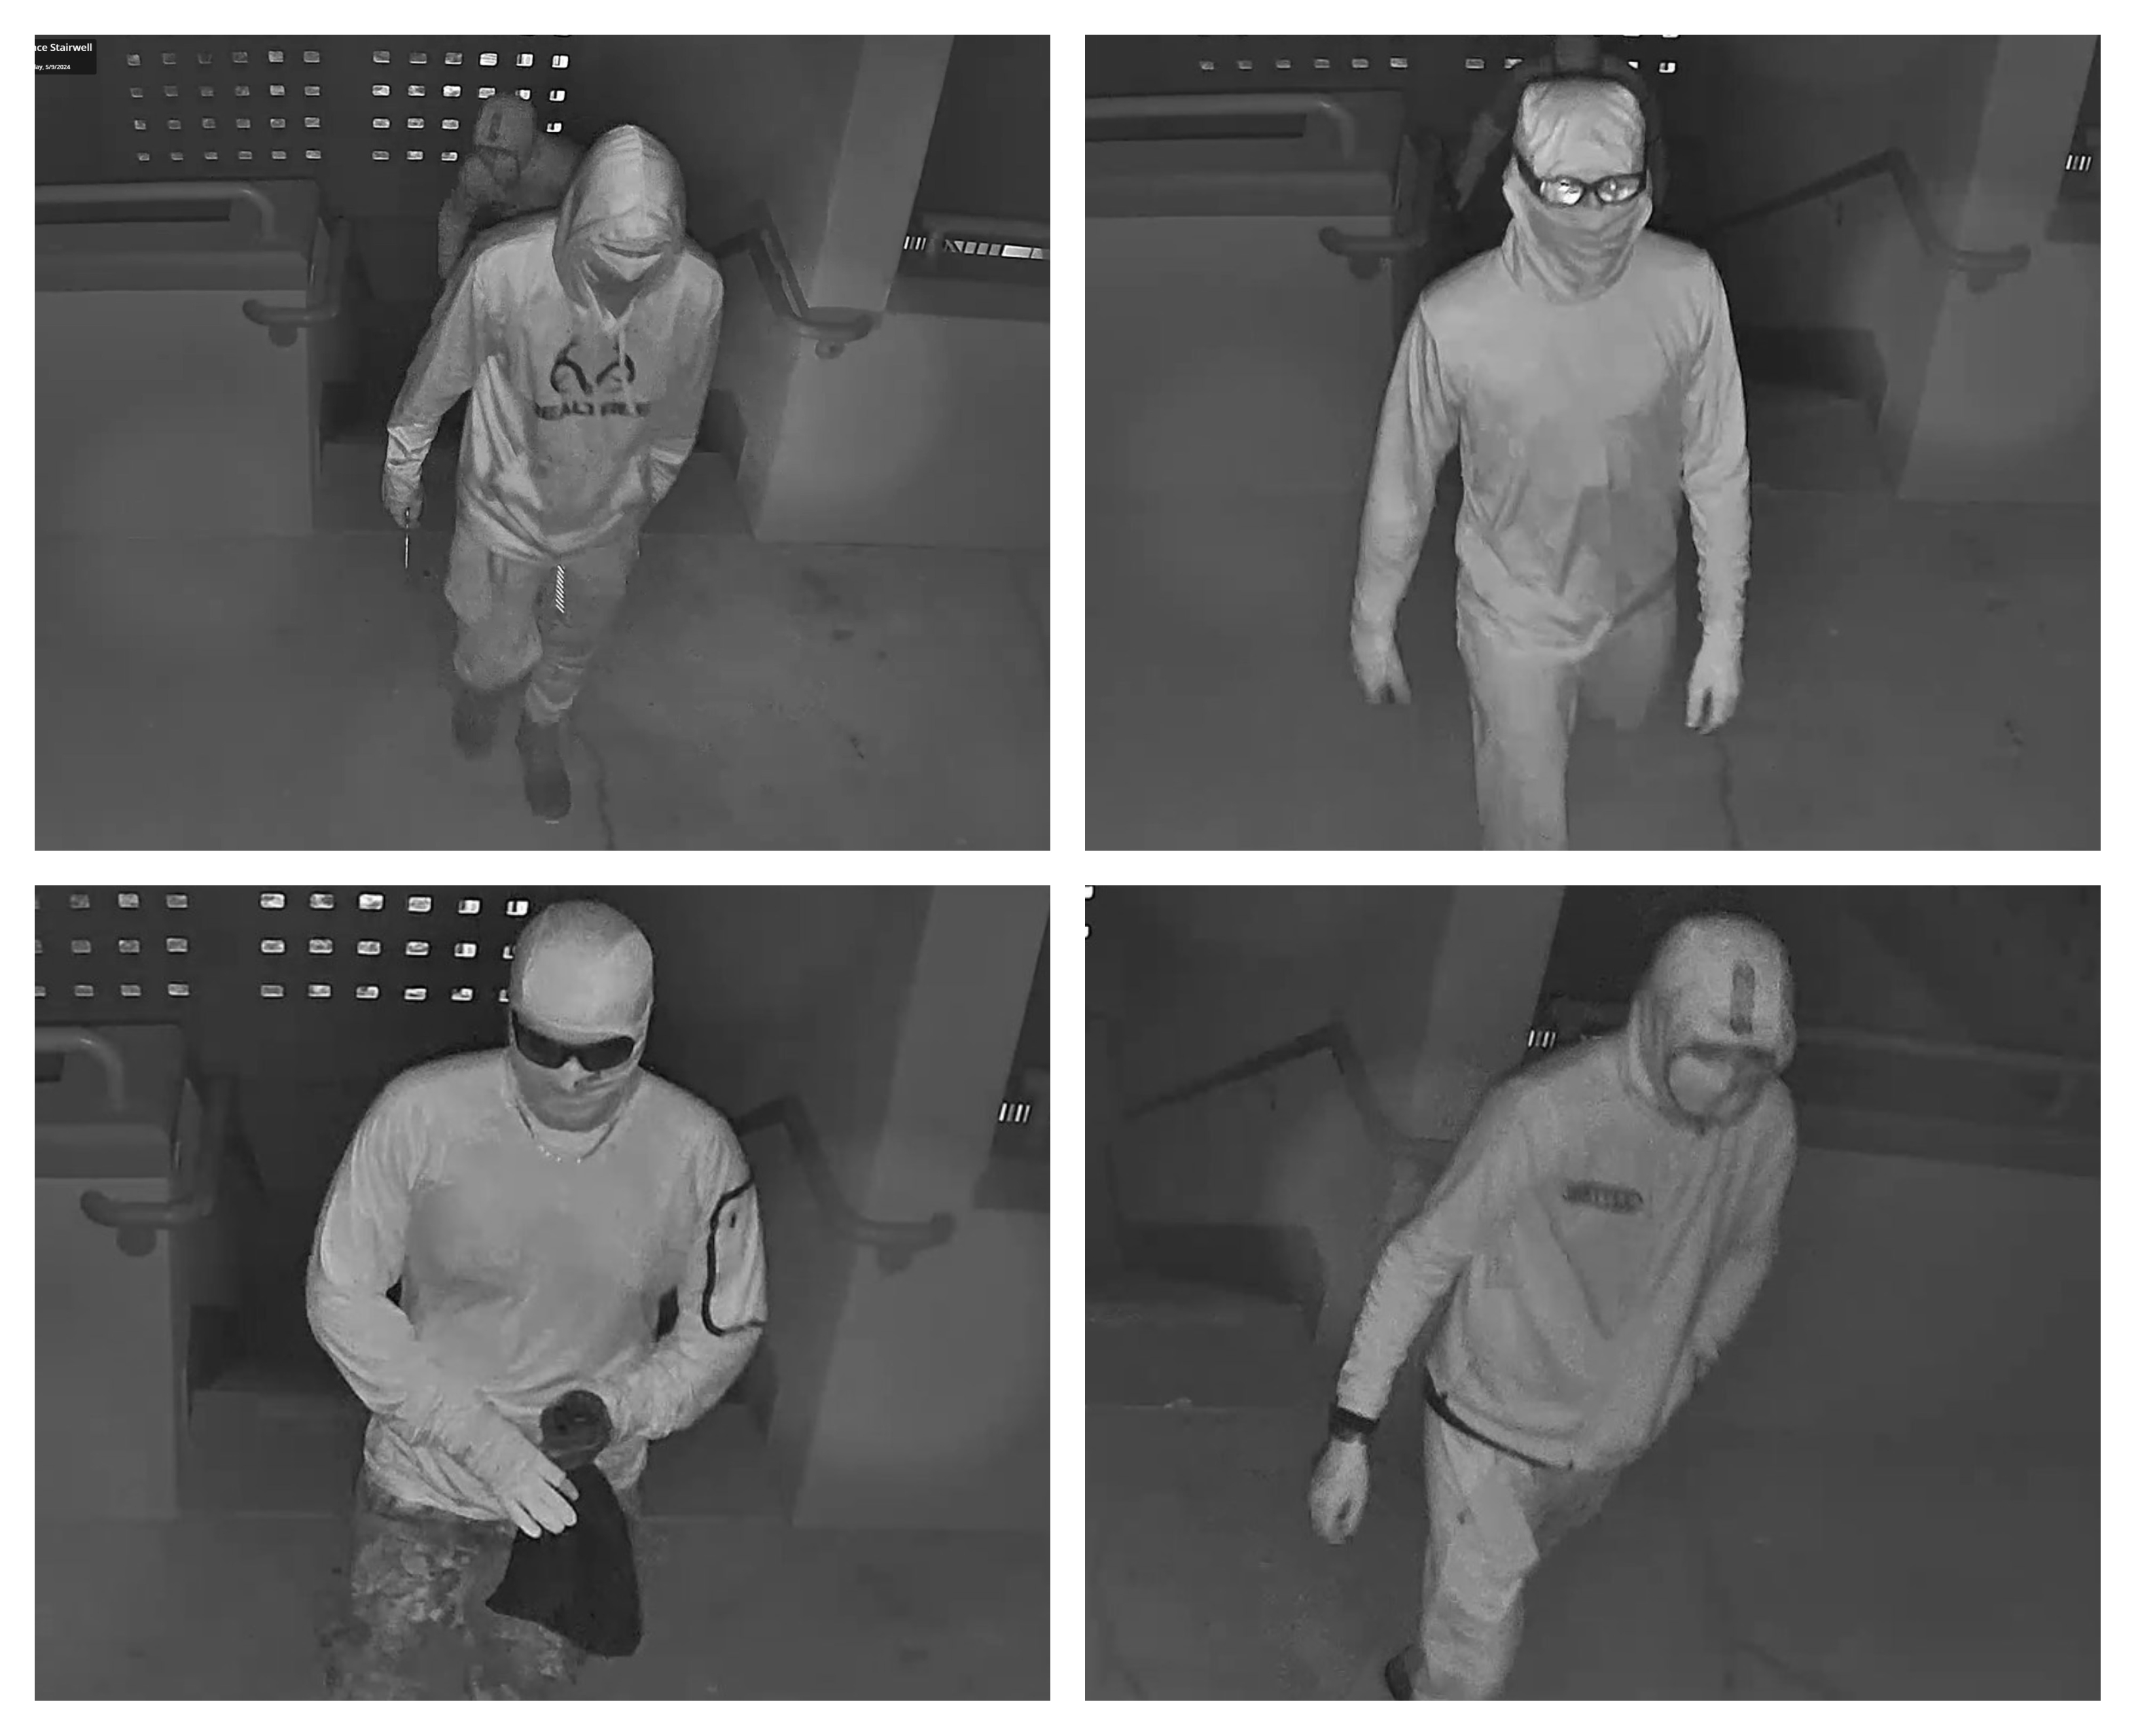 Fort White High School was burglarized and vandalized in the overnight hours of Wednesday night and Thursday morning. The Columbia County Sheriff’s Office is looking for help in identifying the four suspects caught on video surveillance from the school. (COURTESY COLUMBIA COUNTY SHERIFF'S OFFICE)